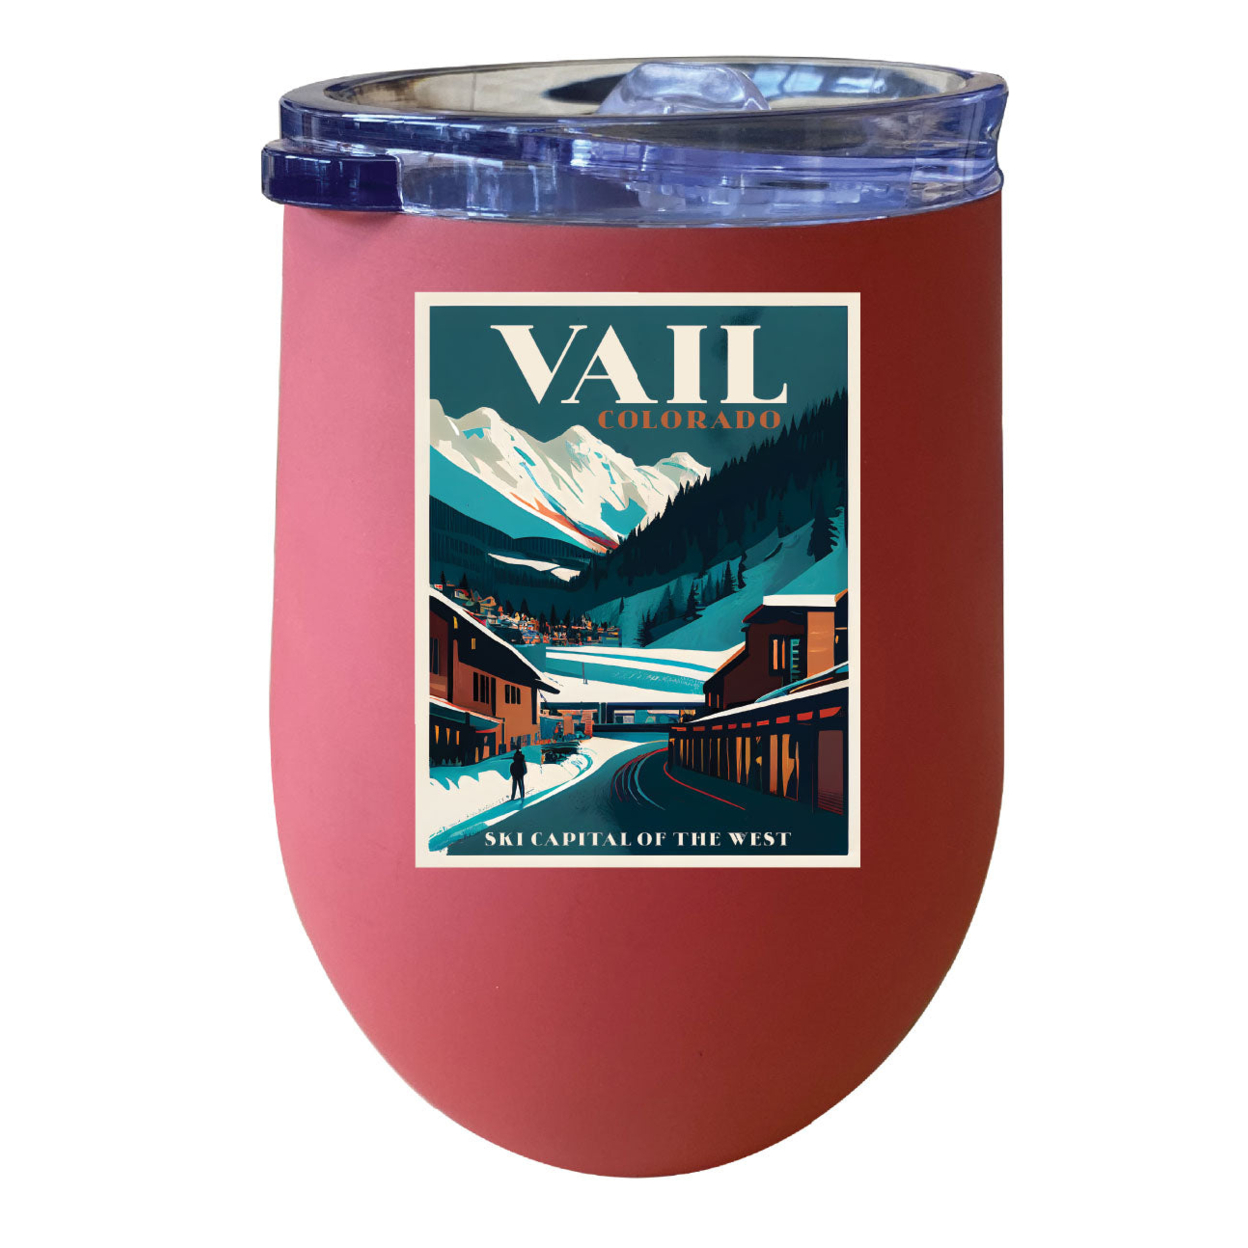 Vail Colorado Souvenir 12 Oz Insulated Wine Stainless Steel Tumbler - Coral